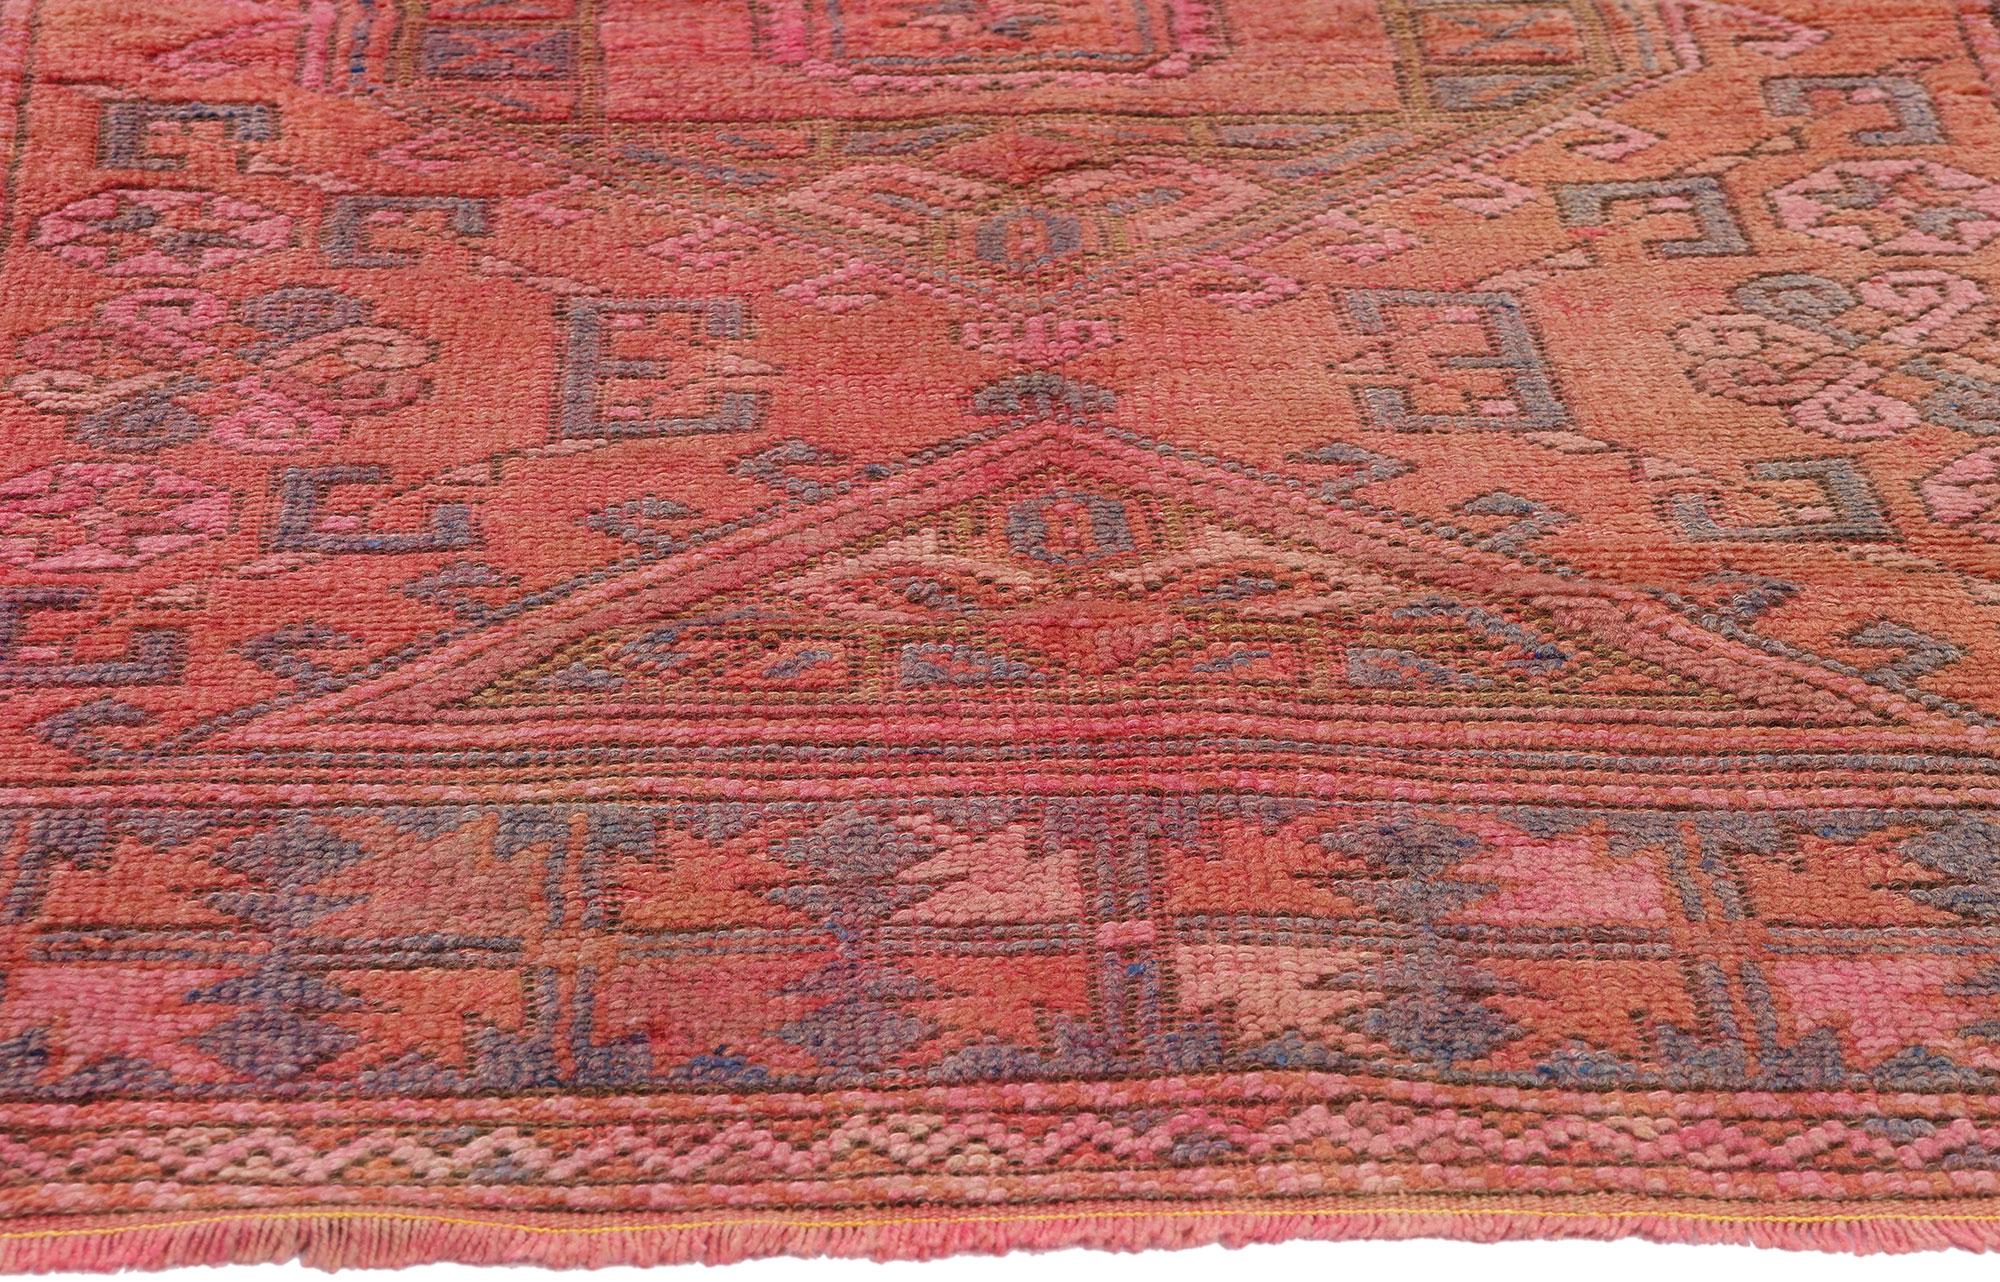 Vintage Pink Turkish Oushak Rug, Global Bohemian Meets Tribal Enchantment In Good Condition For Sale In Dallas, TX